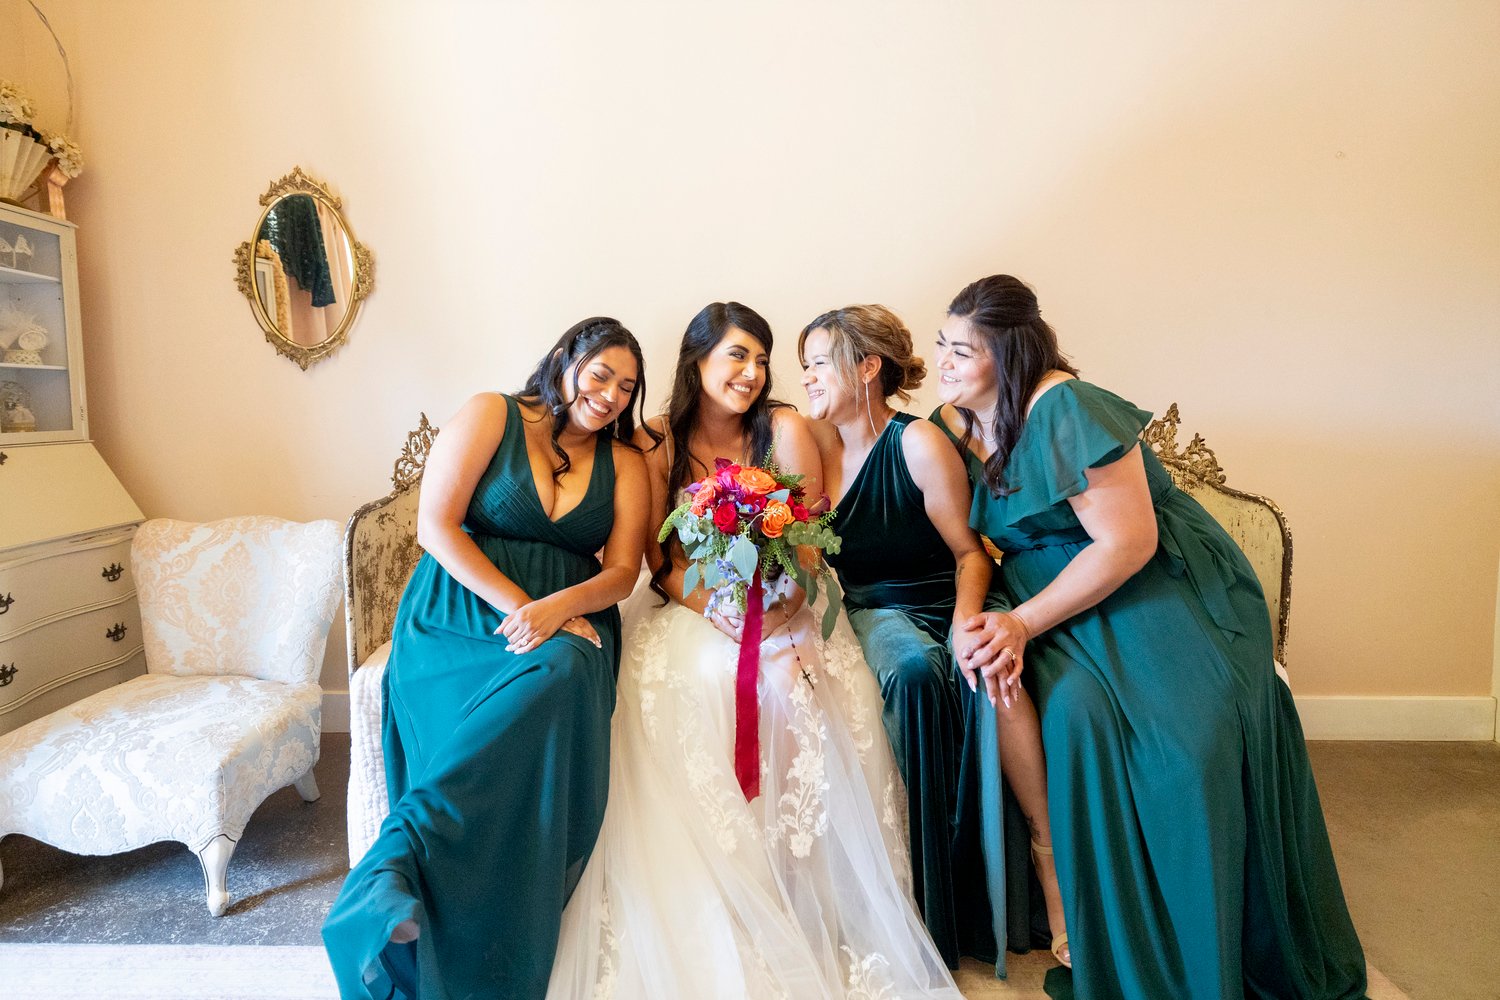 Bride smiling at a a bridesmaid while sitting on a bed